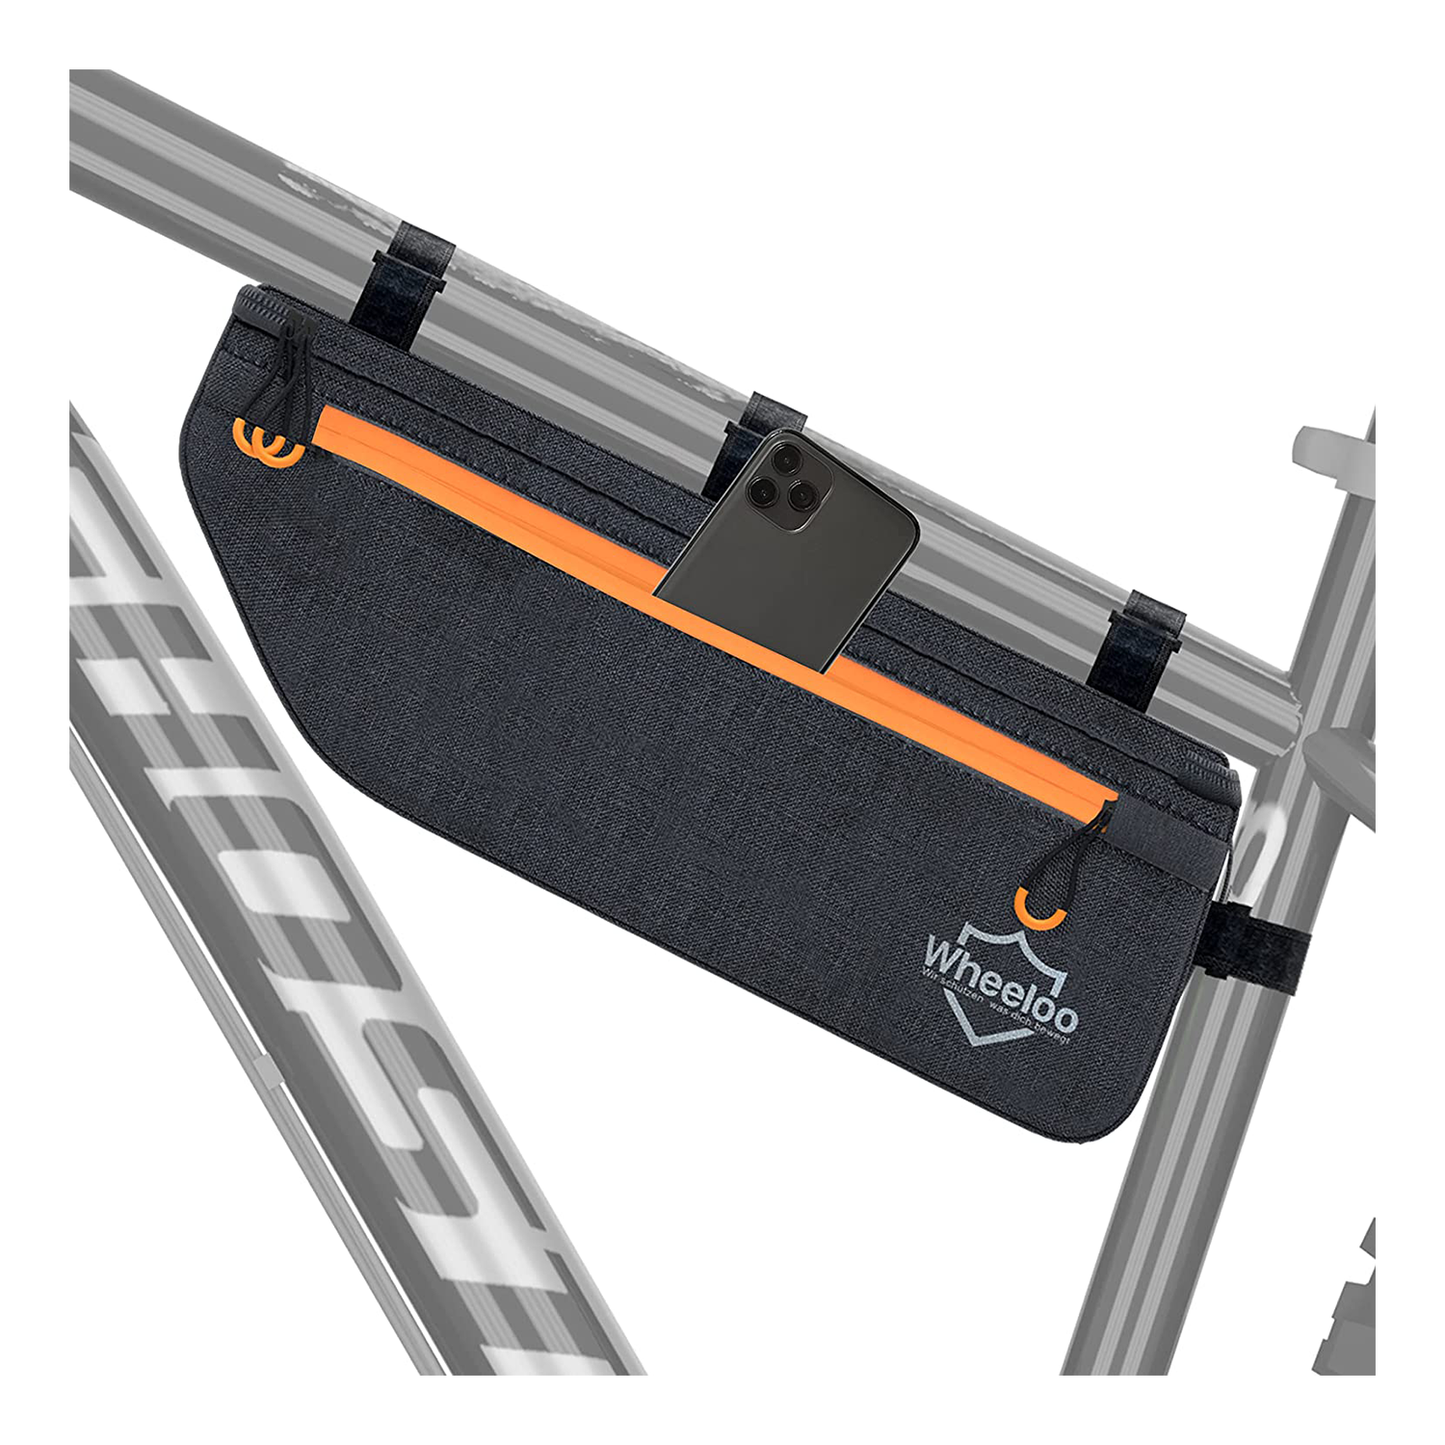 Bicycle frame bag from the Wheeloo brand